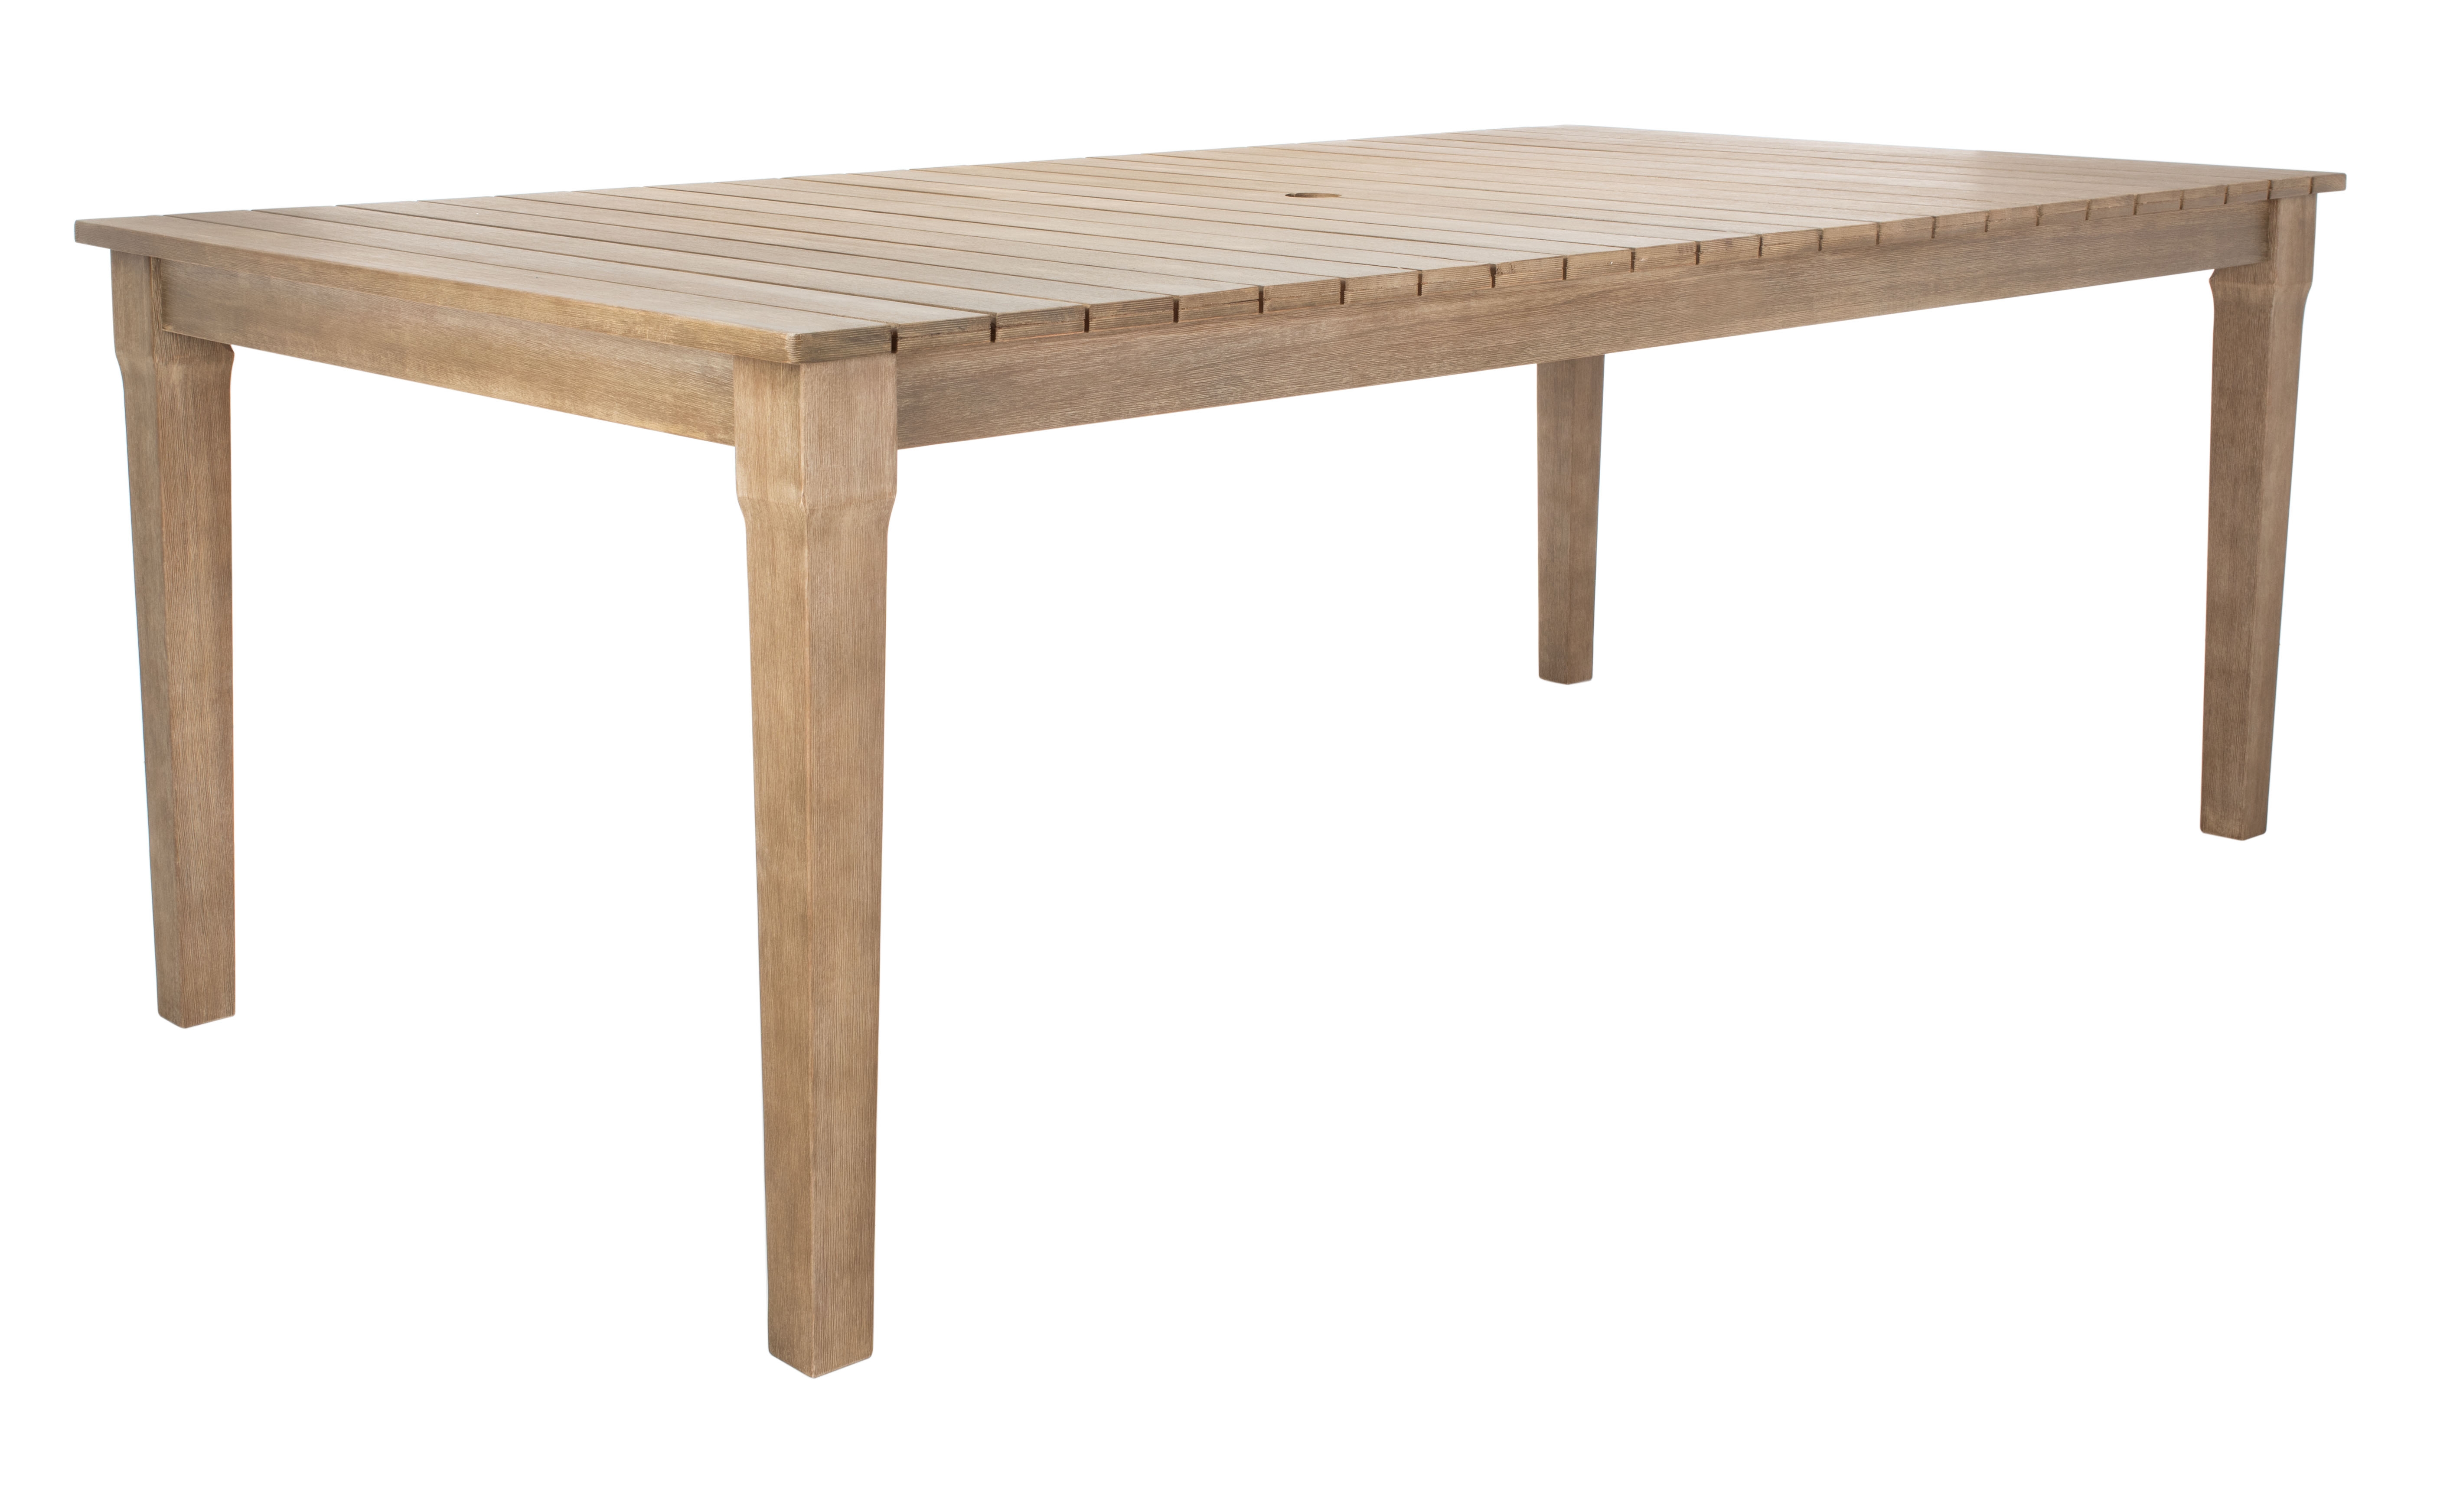 Dominica Wooden Outdoor Dining Table - Natural - Arlo Home - Image 5